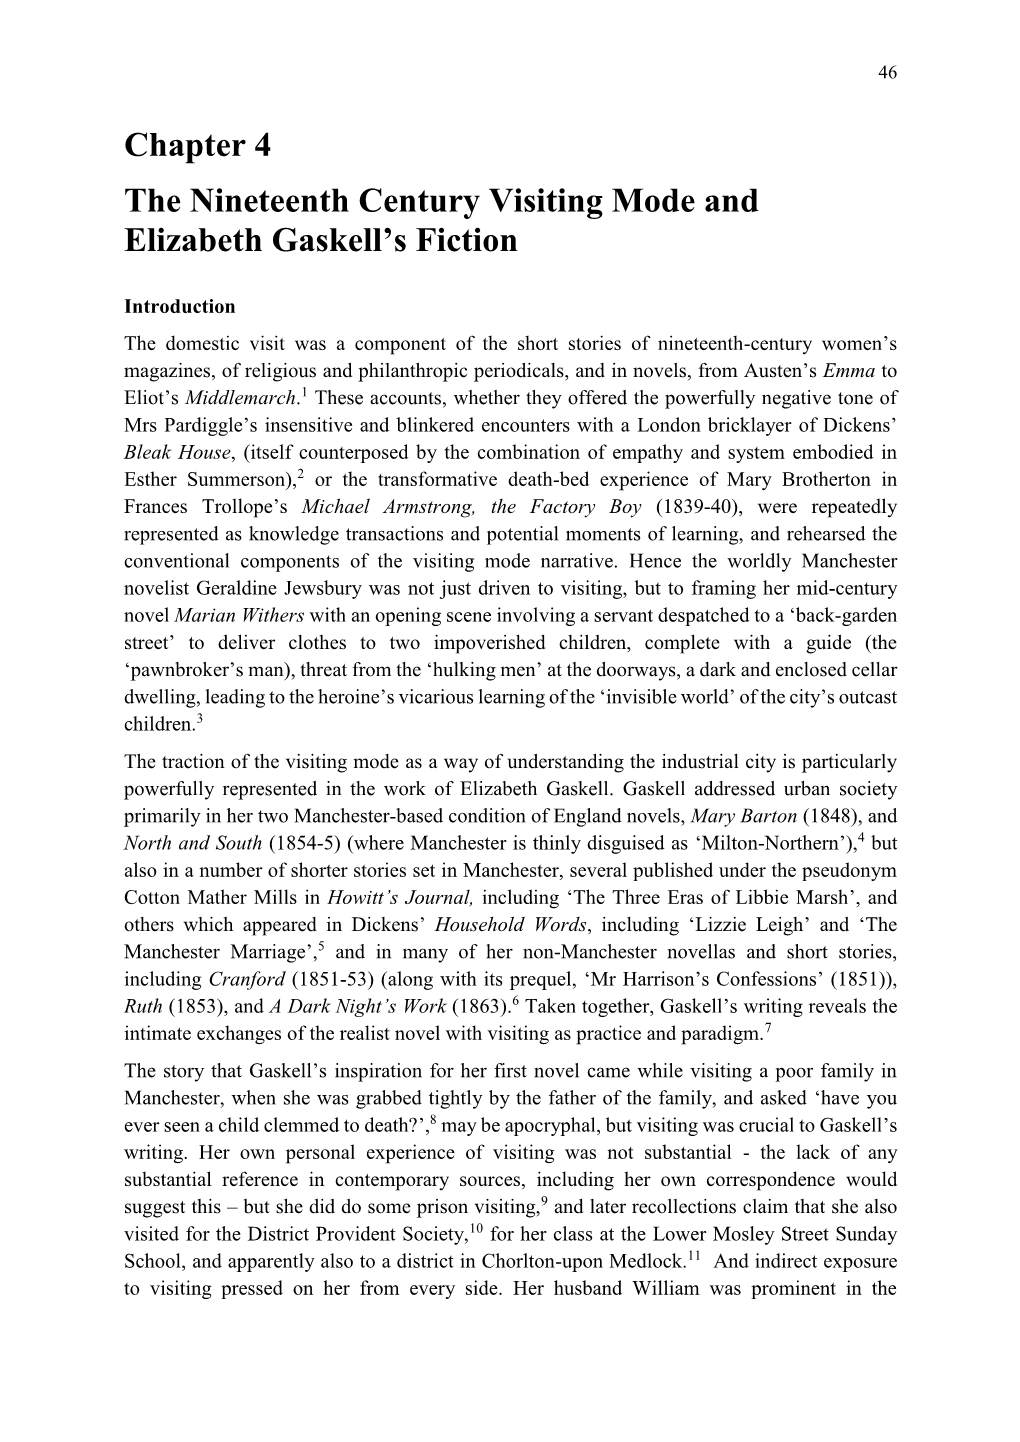 Chapter 4 the Nineteenth Century Visiting Mode and Elizabeth Gaskell’S Fiction